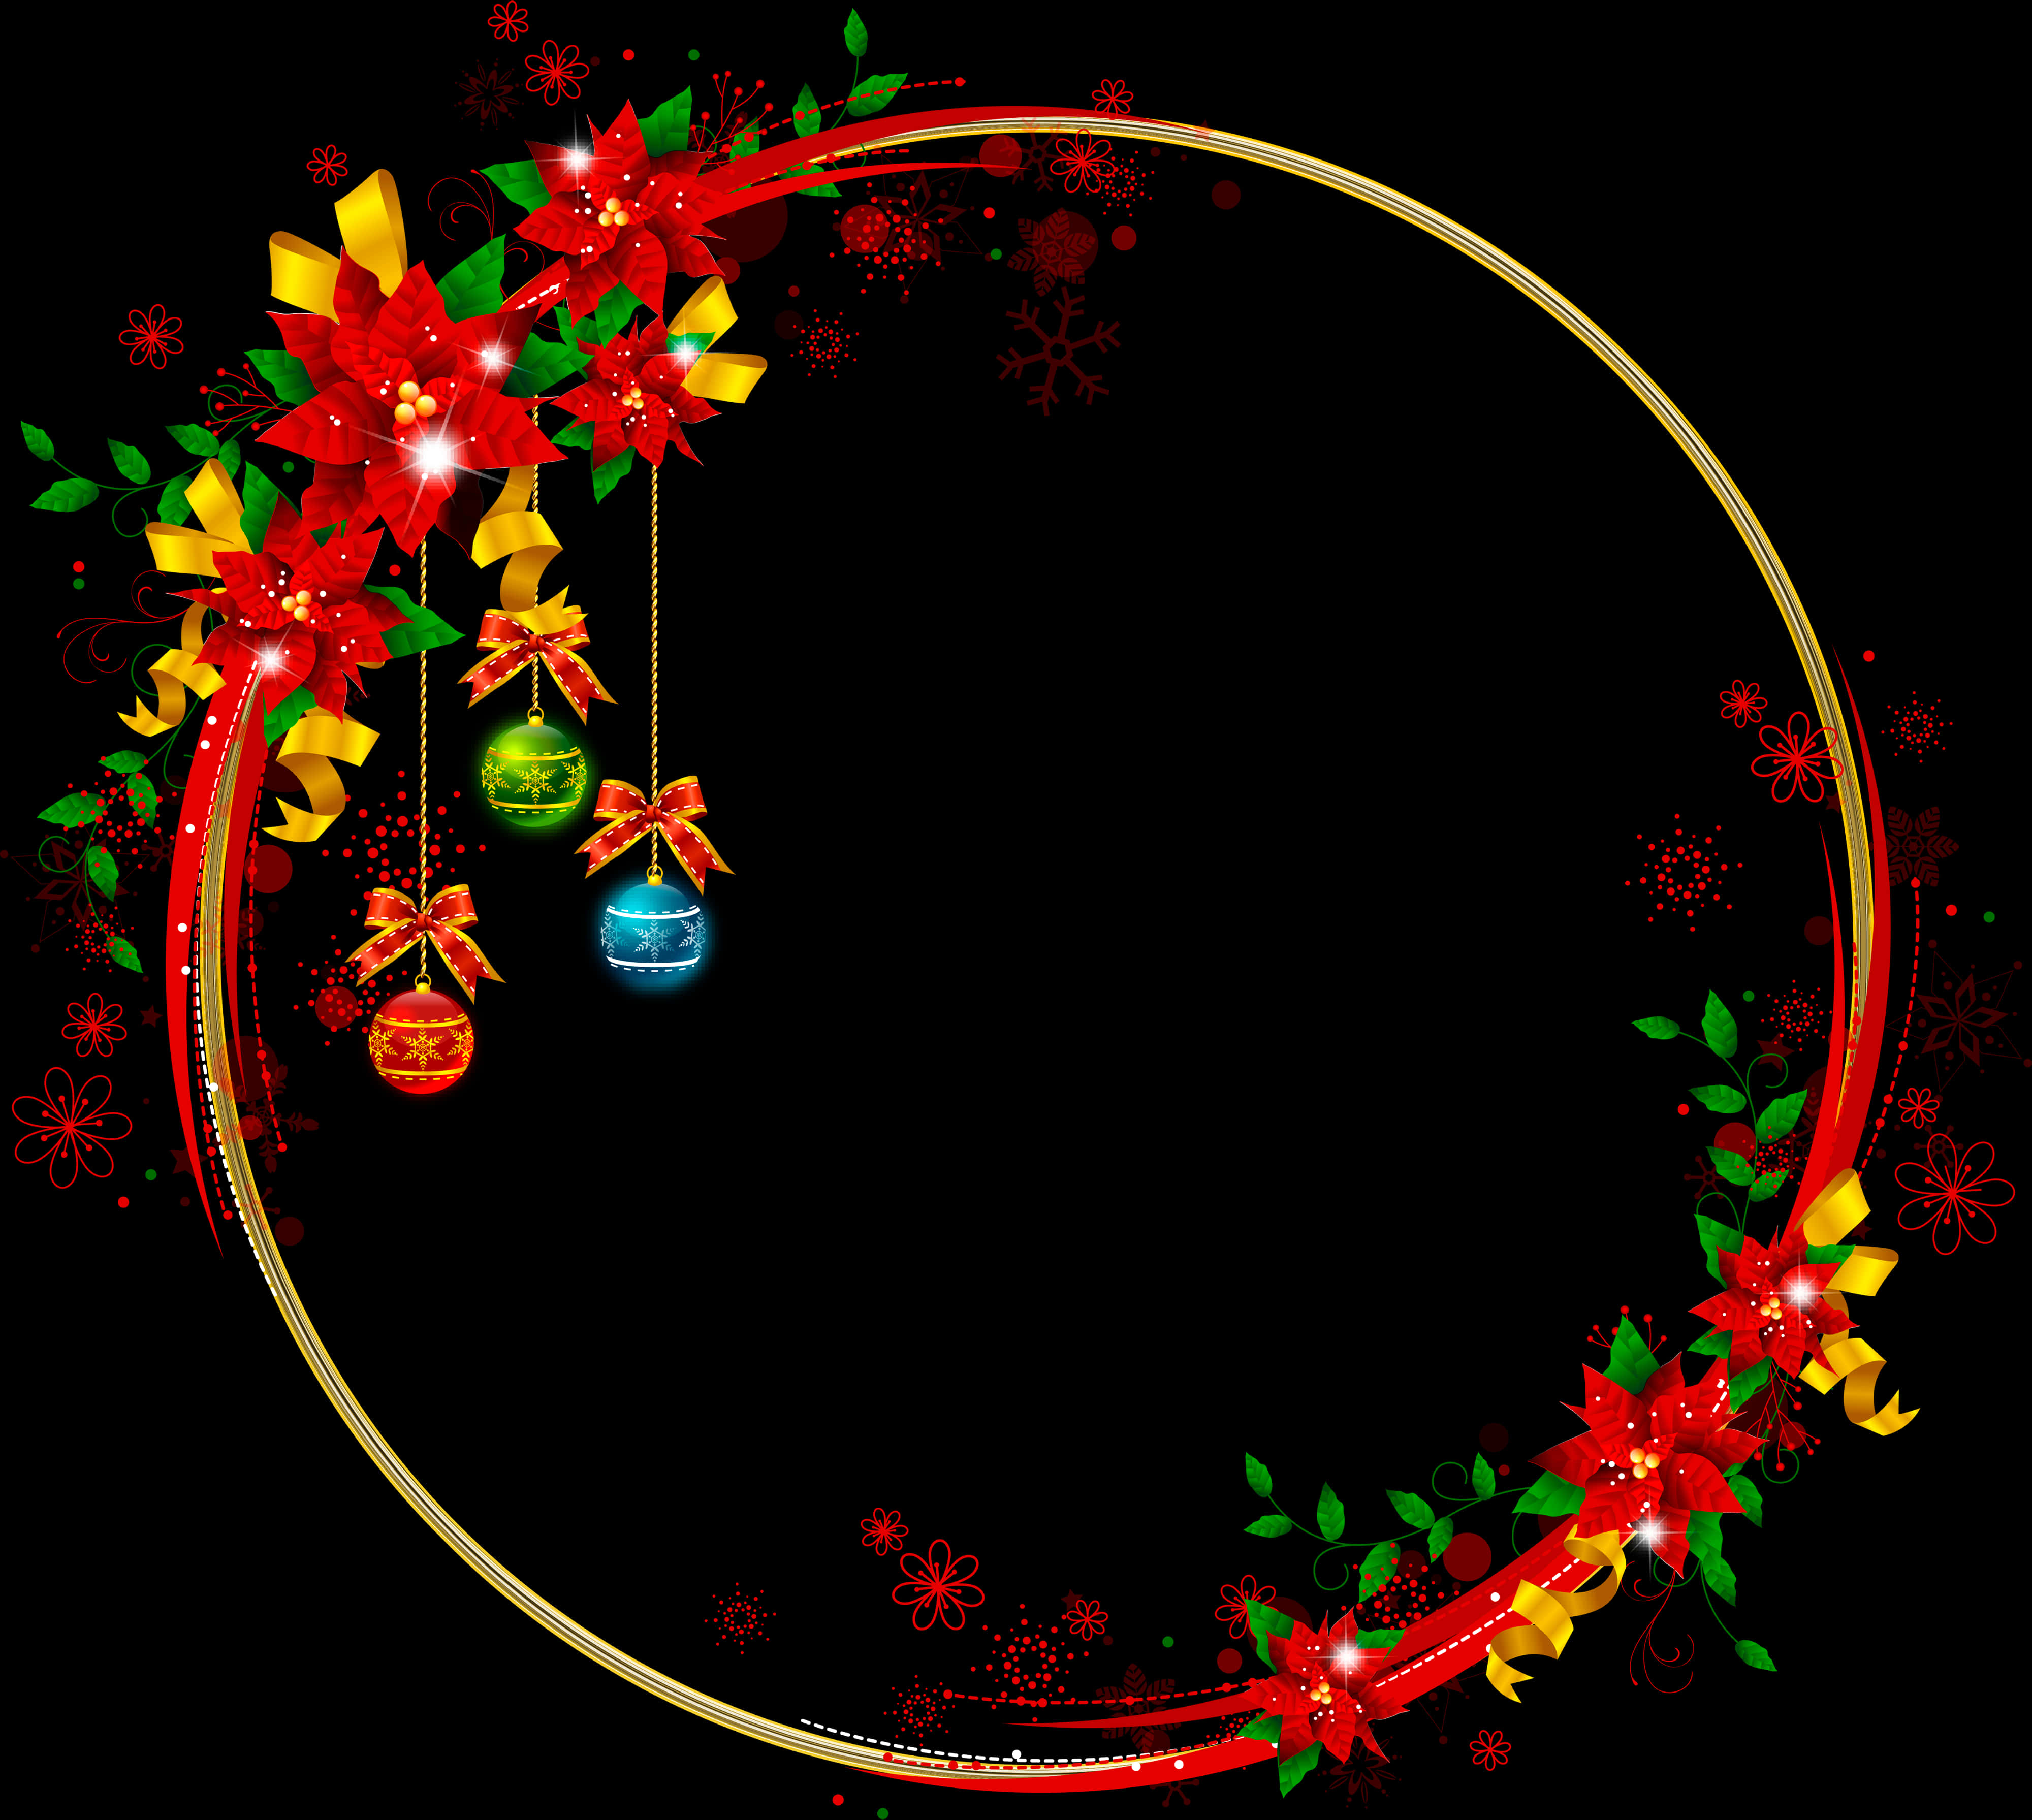 A Circular Frame With Ornaments And Flowers